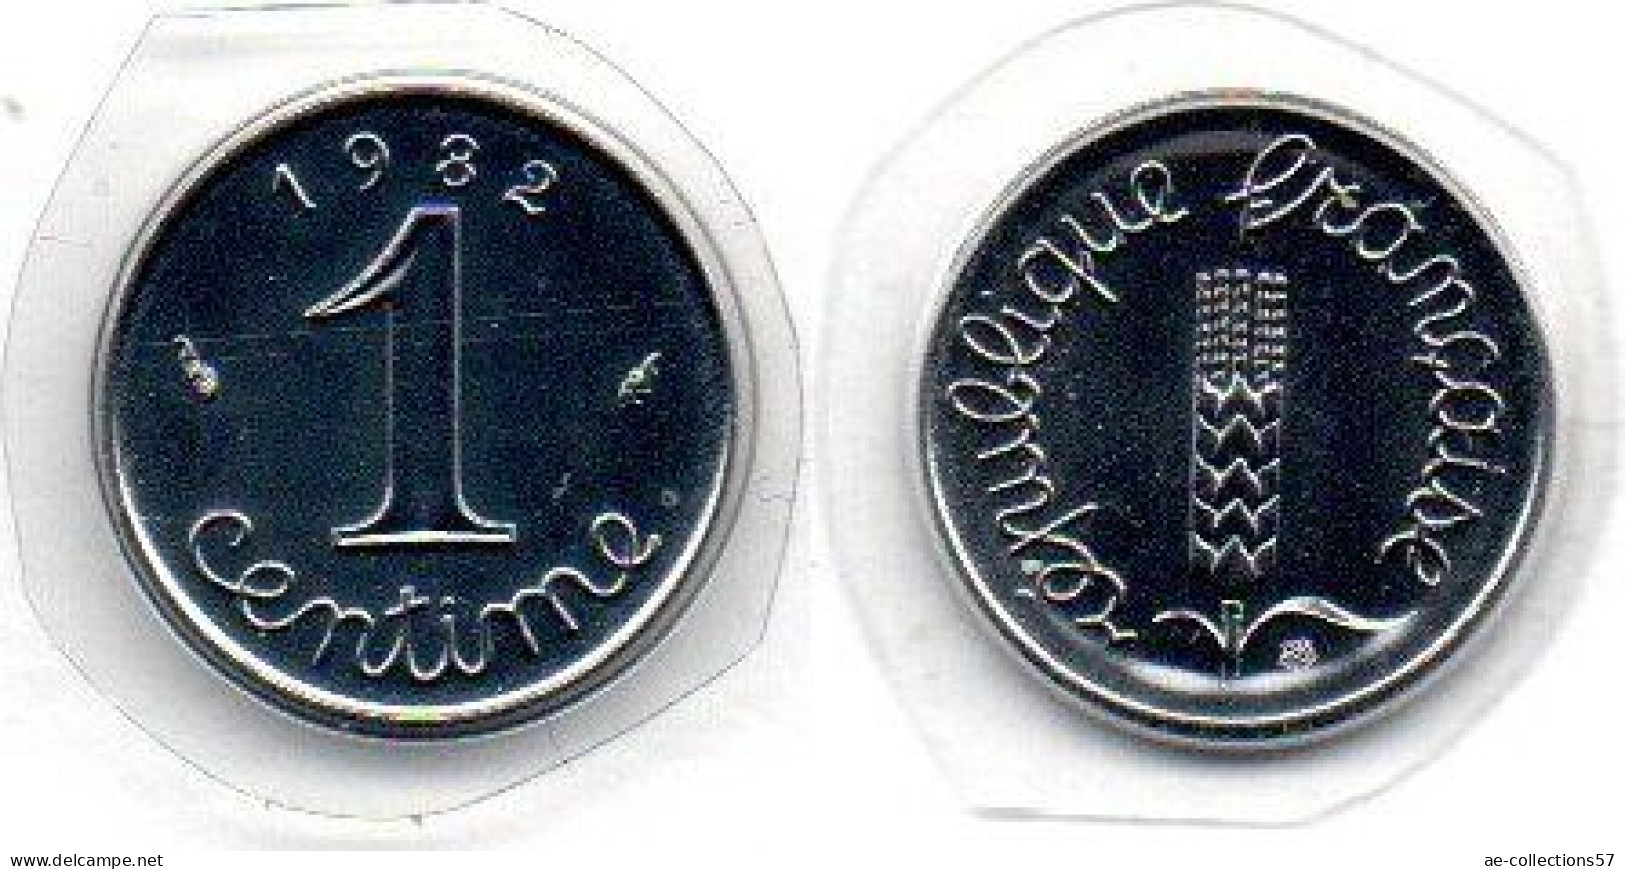 MA 20599 /  1 Centime 1982 FDC - 1 Centime